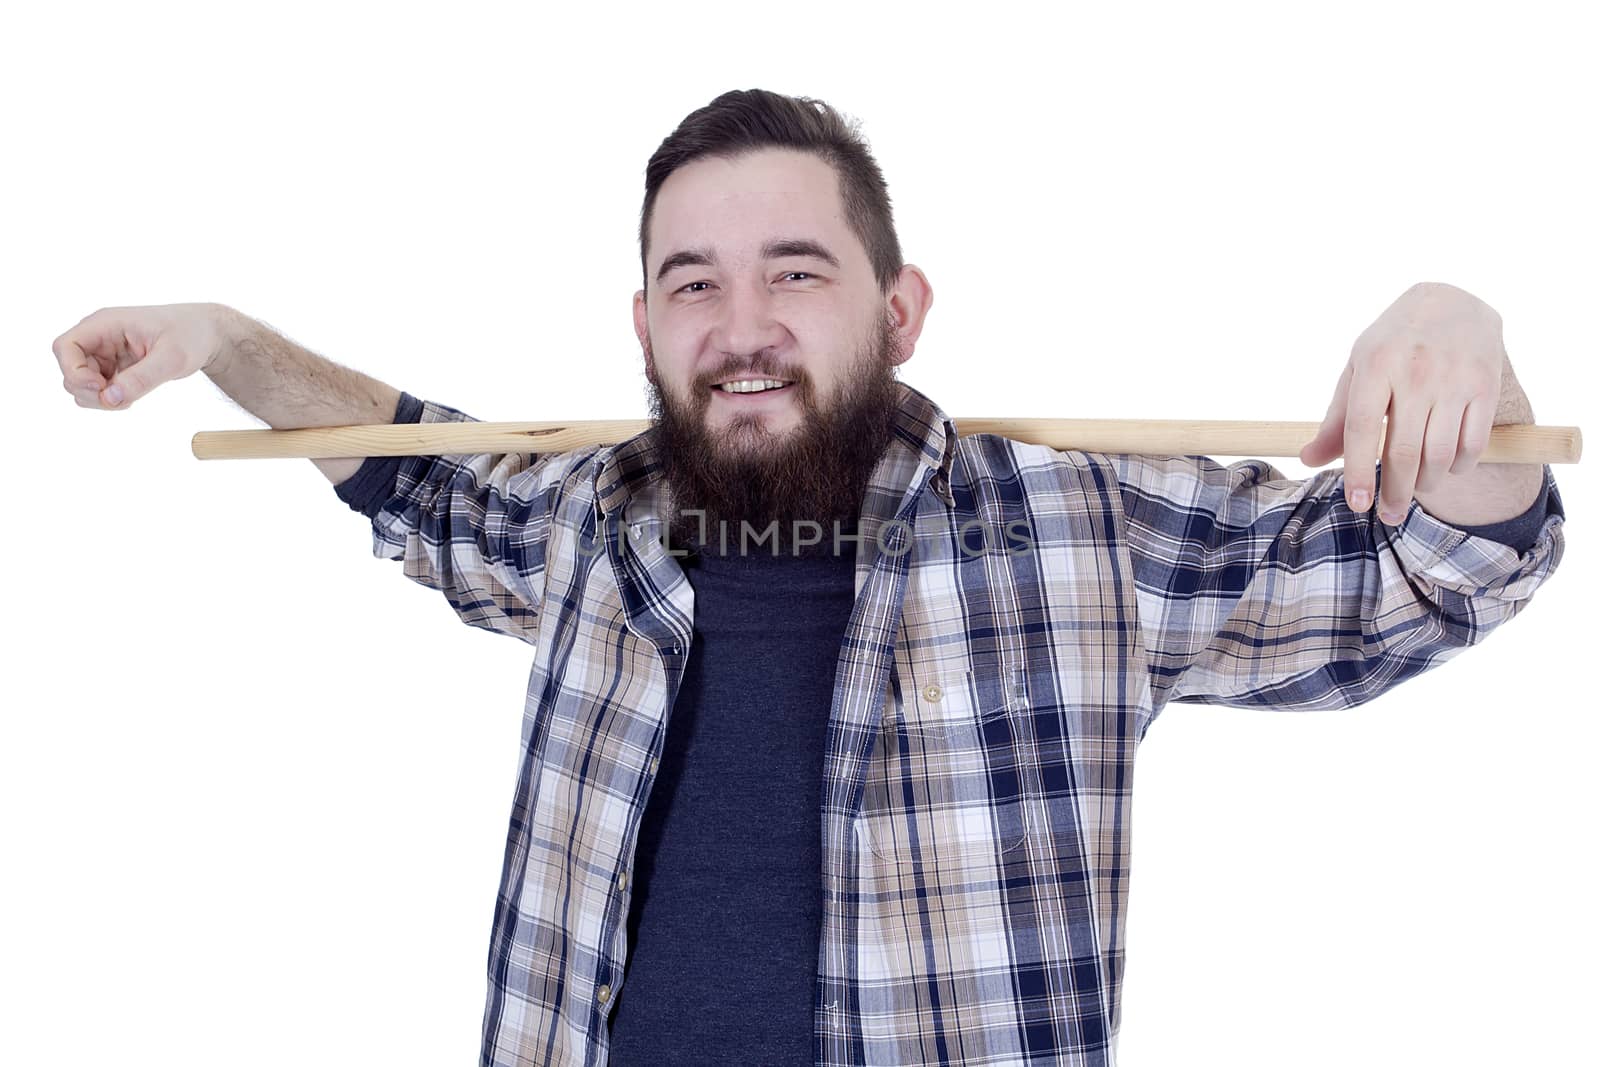 Bearded young farmer in a plaid shirt with a stick on a white background